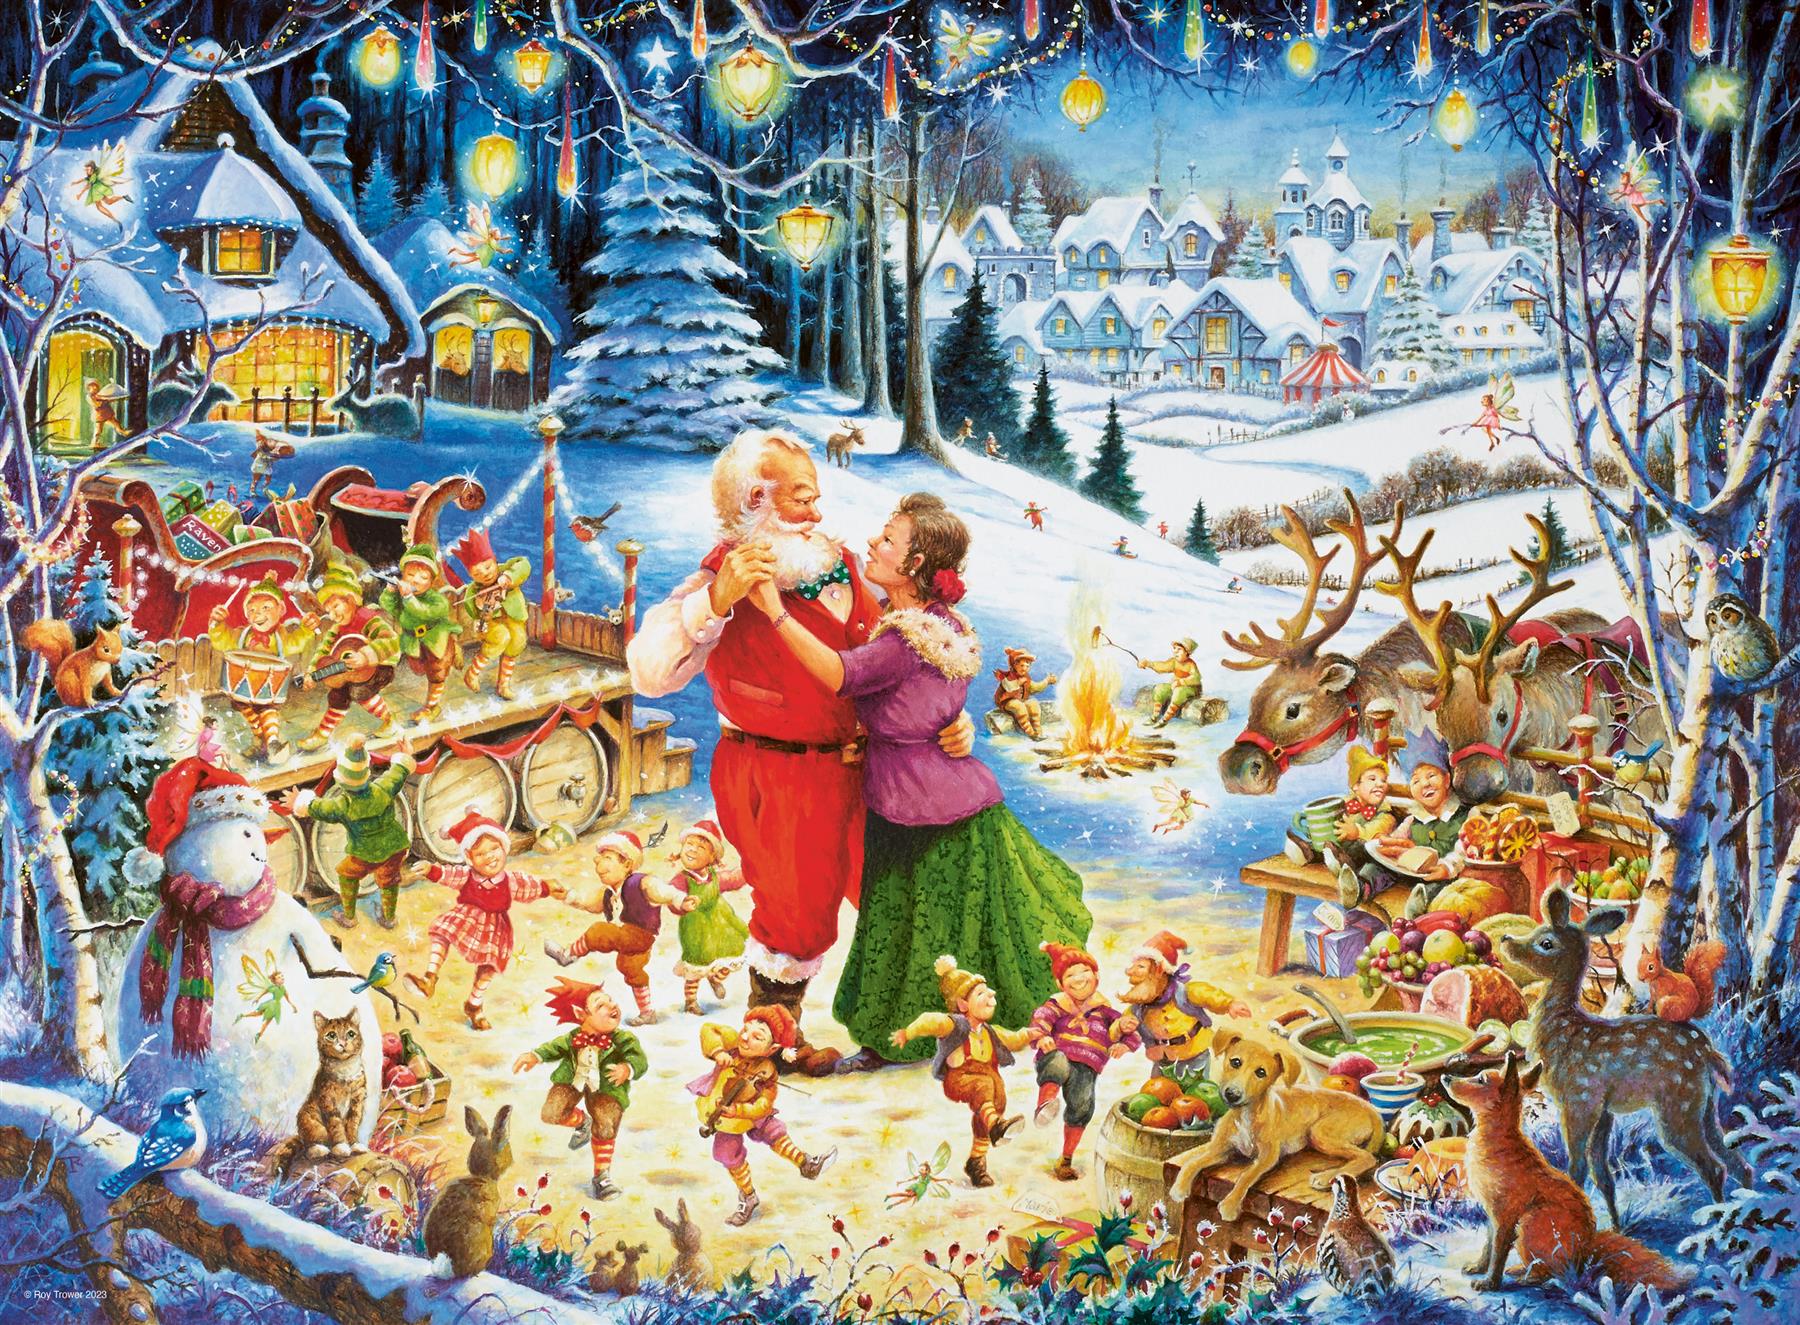 Ravensburger Disney Christmas All Aboard 1000 Piece Puzzle – The